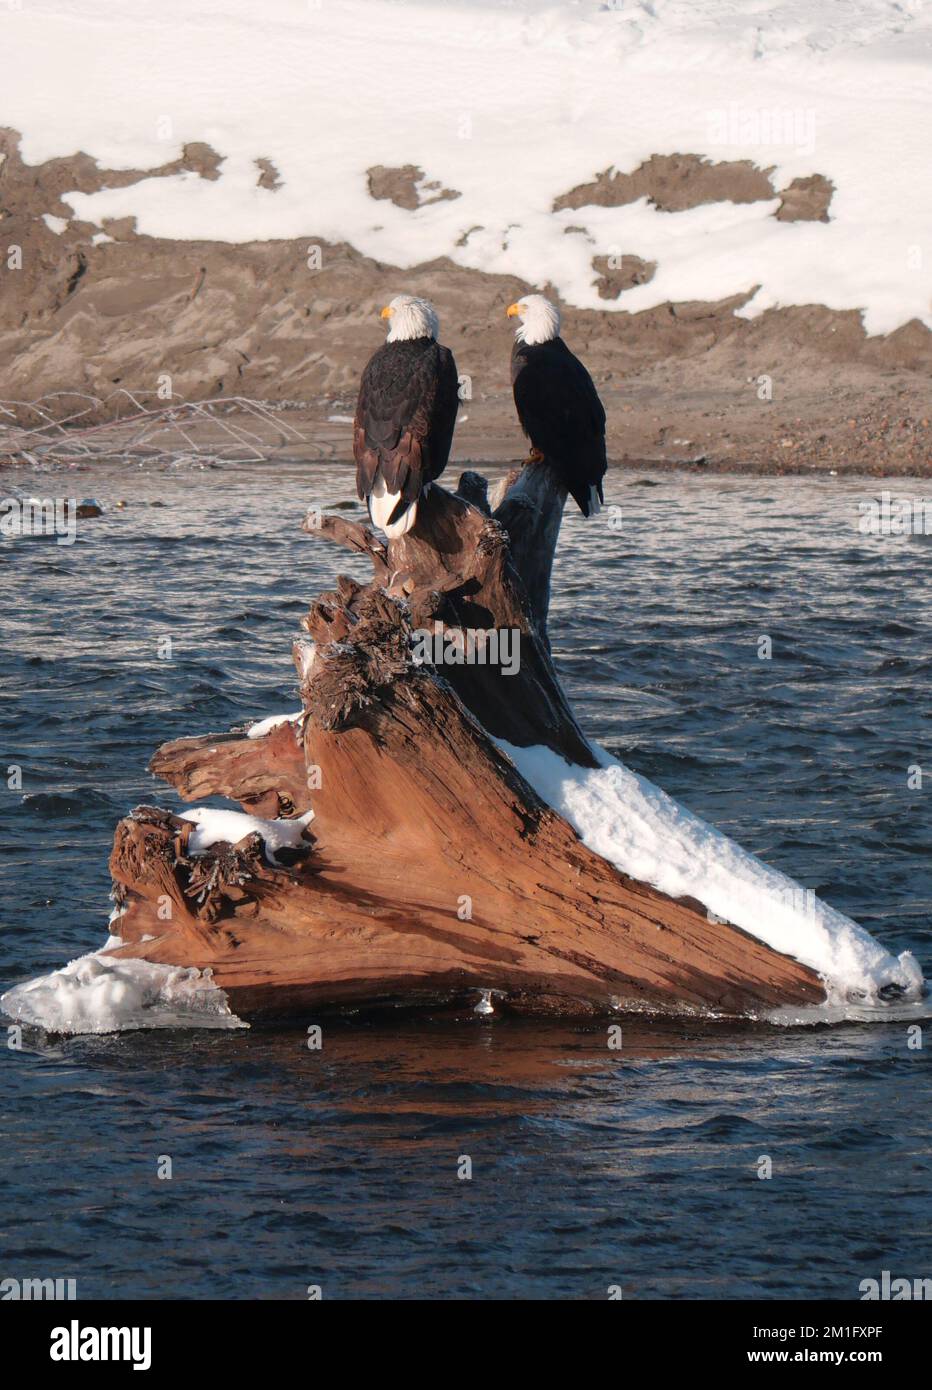 Two bald eagles perched on a fallen tree trunk in the Squamish River at the Brackendale Eagle Run Vista Point in British Columbia, Canada Stock Photo